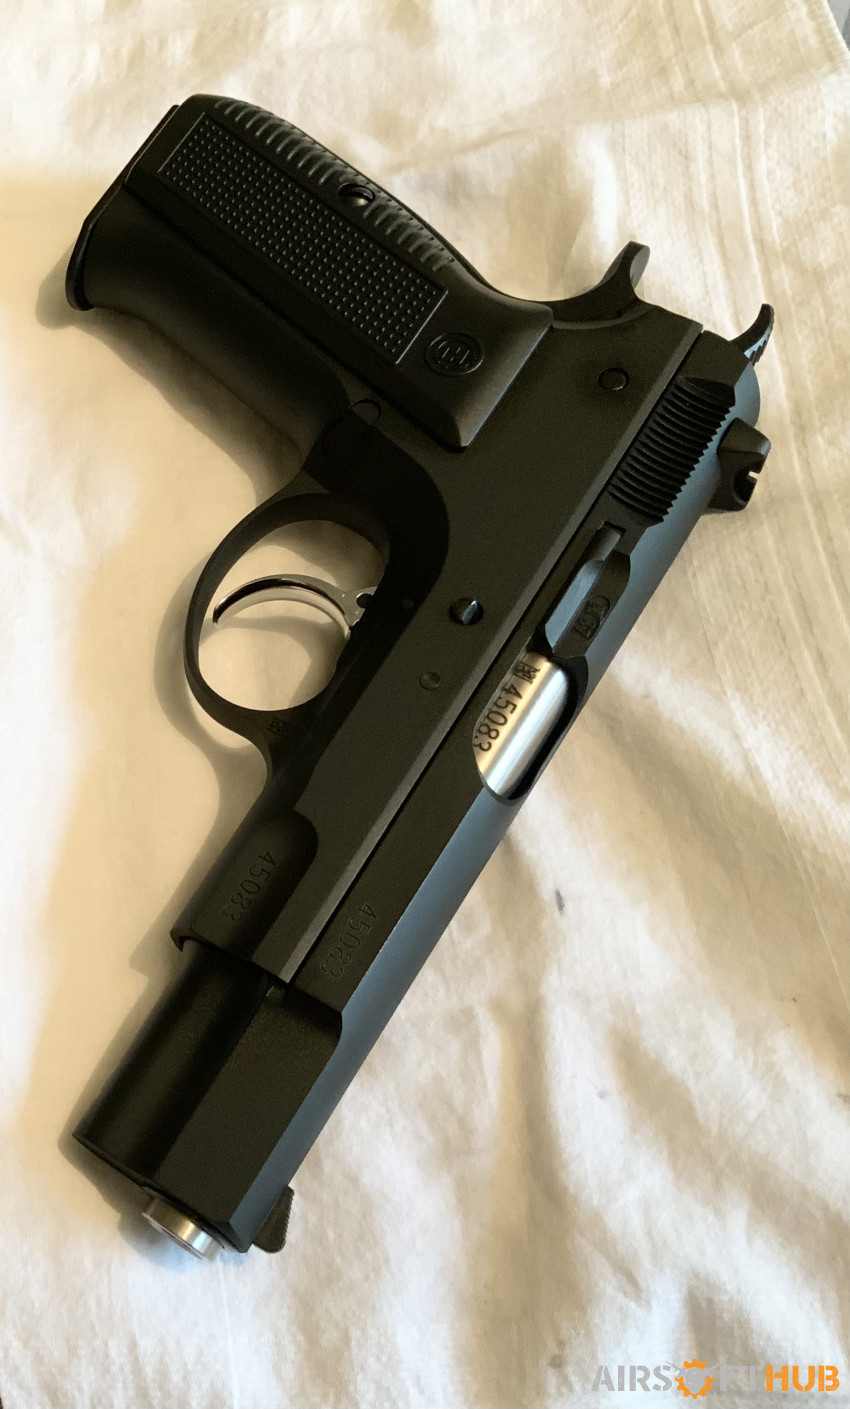 Guarder CZ75 - Used airsoft equipment